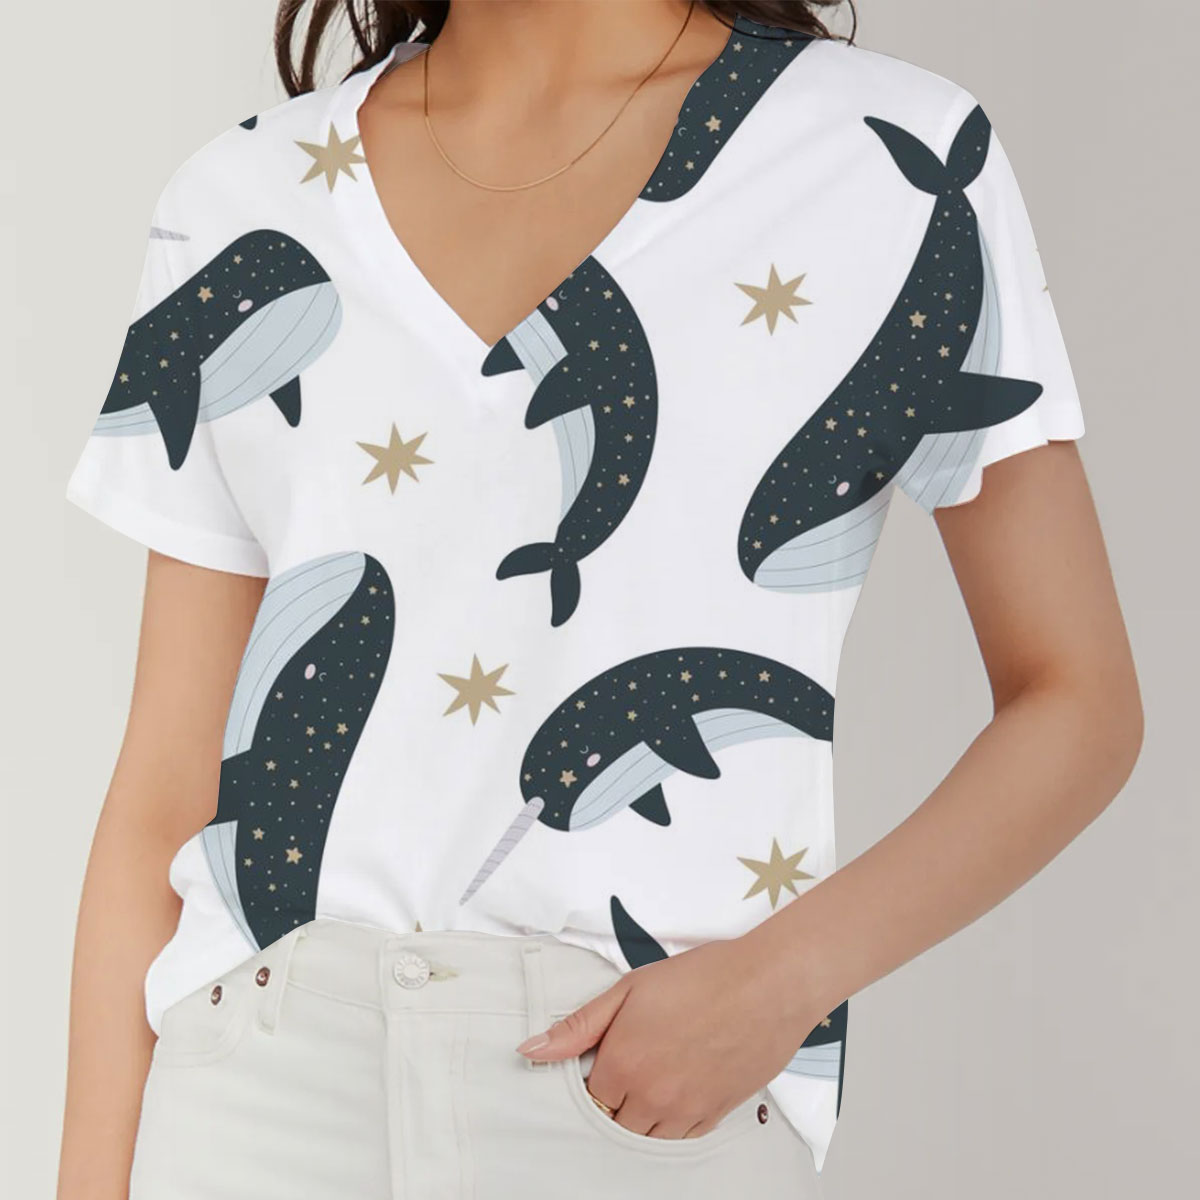 Star Narhwhal Whale V-Neck Women's T-Shirt